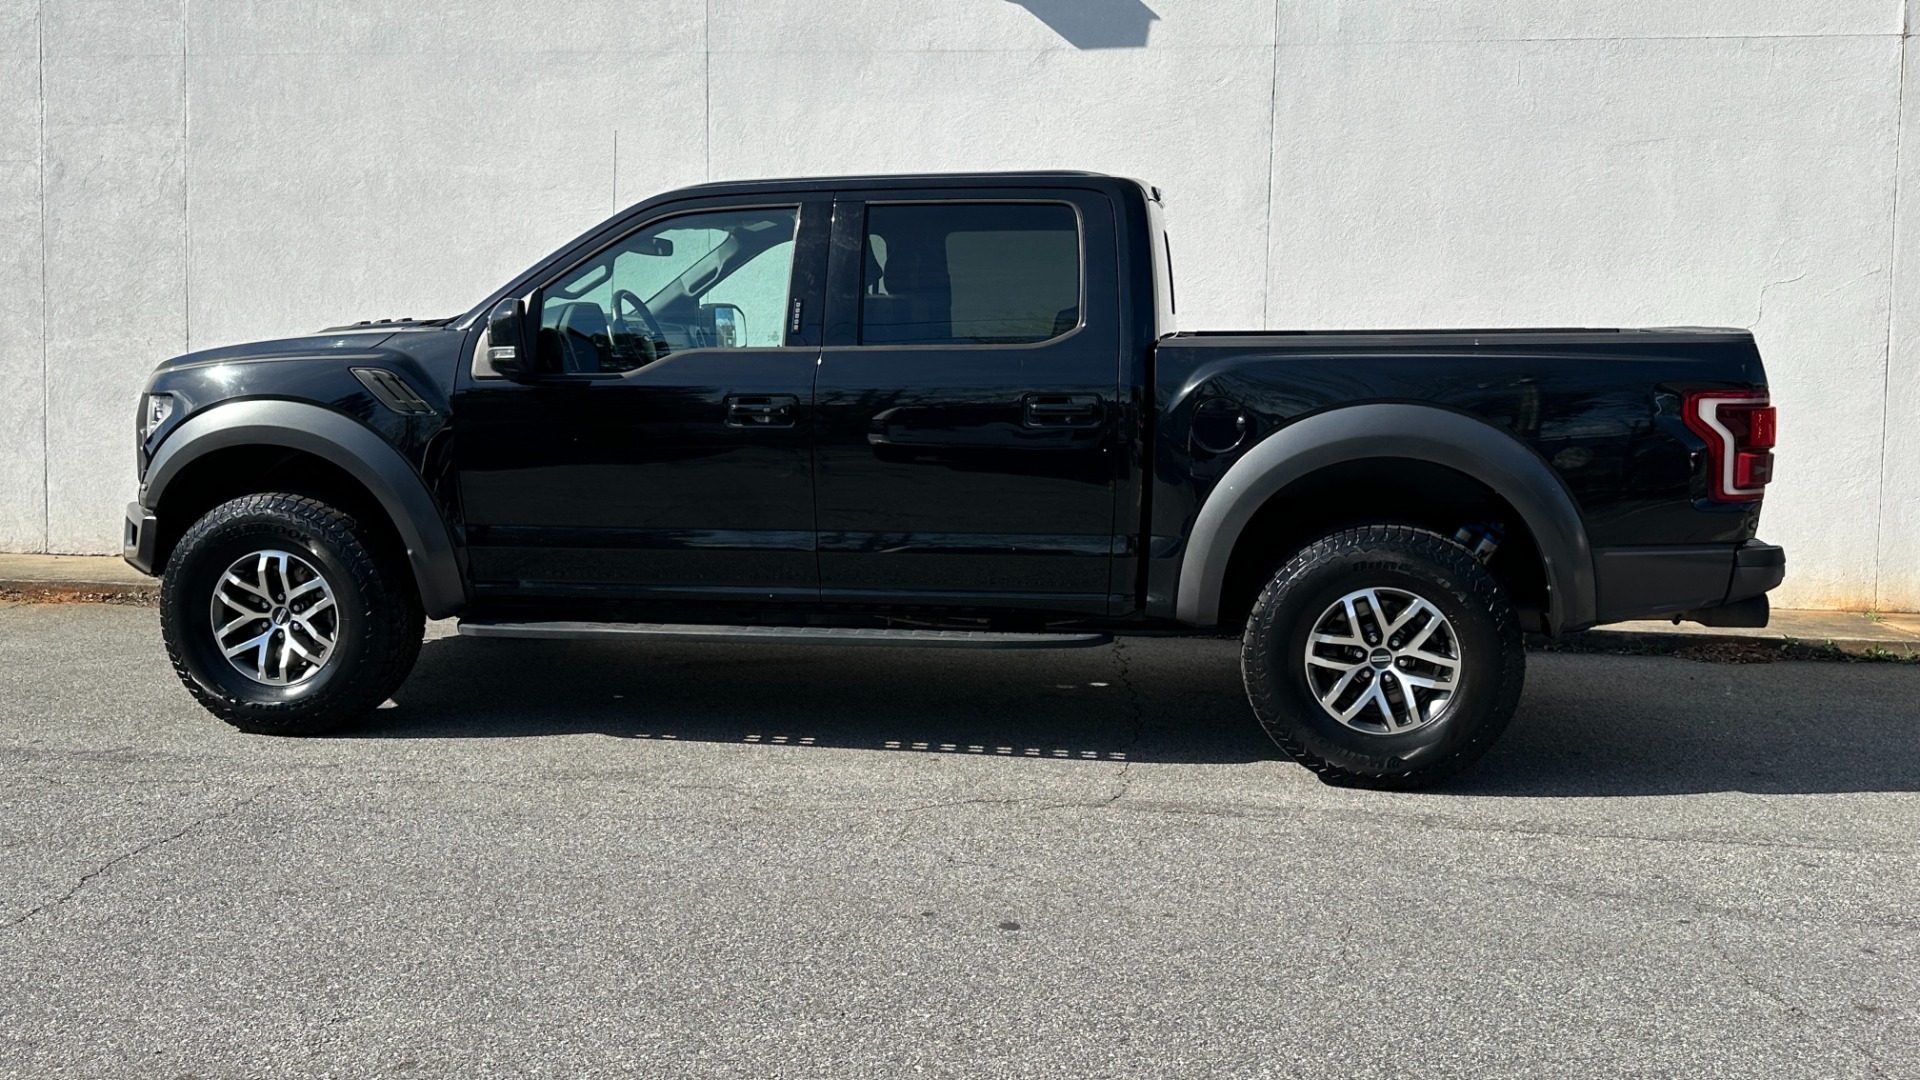 Used 2017 Ford F-150 RAPTOR / 802A PACKAGE / TAILGATE STEP / BEDLINER / SYNC 3 for sale $44,995 at Formula Imports in Charlotte NC 28227 6